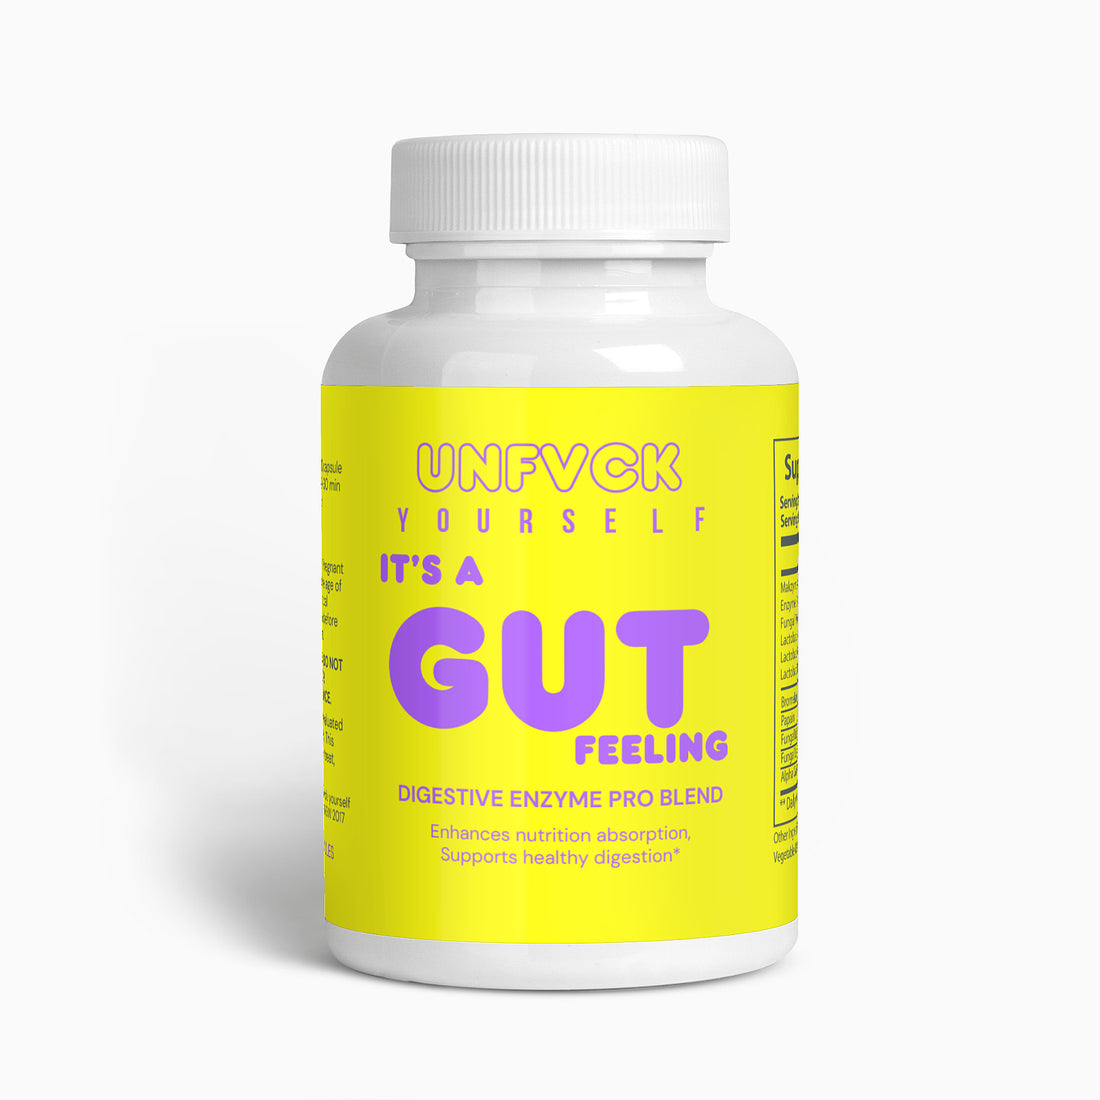 It's a Gut Feeling - Unfvck Yourself Vitamins' Digestive Enzyme Pro Blend